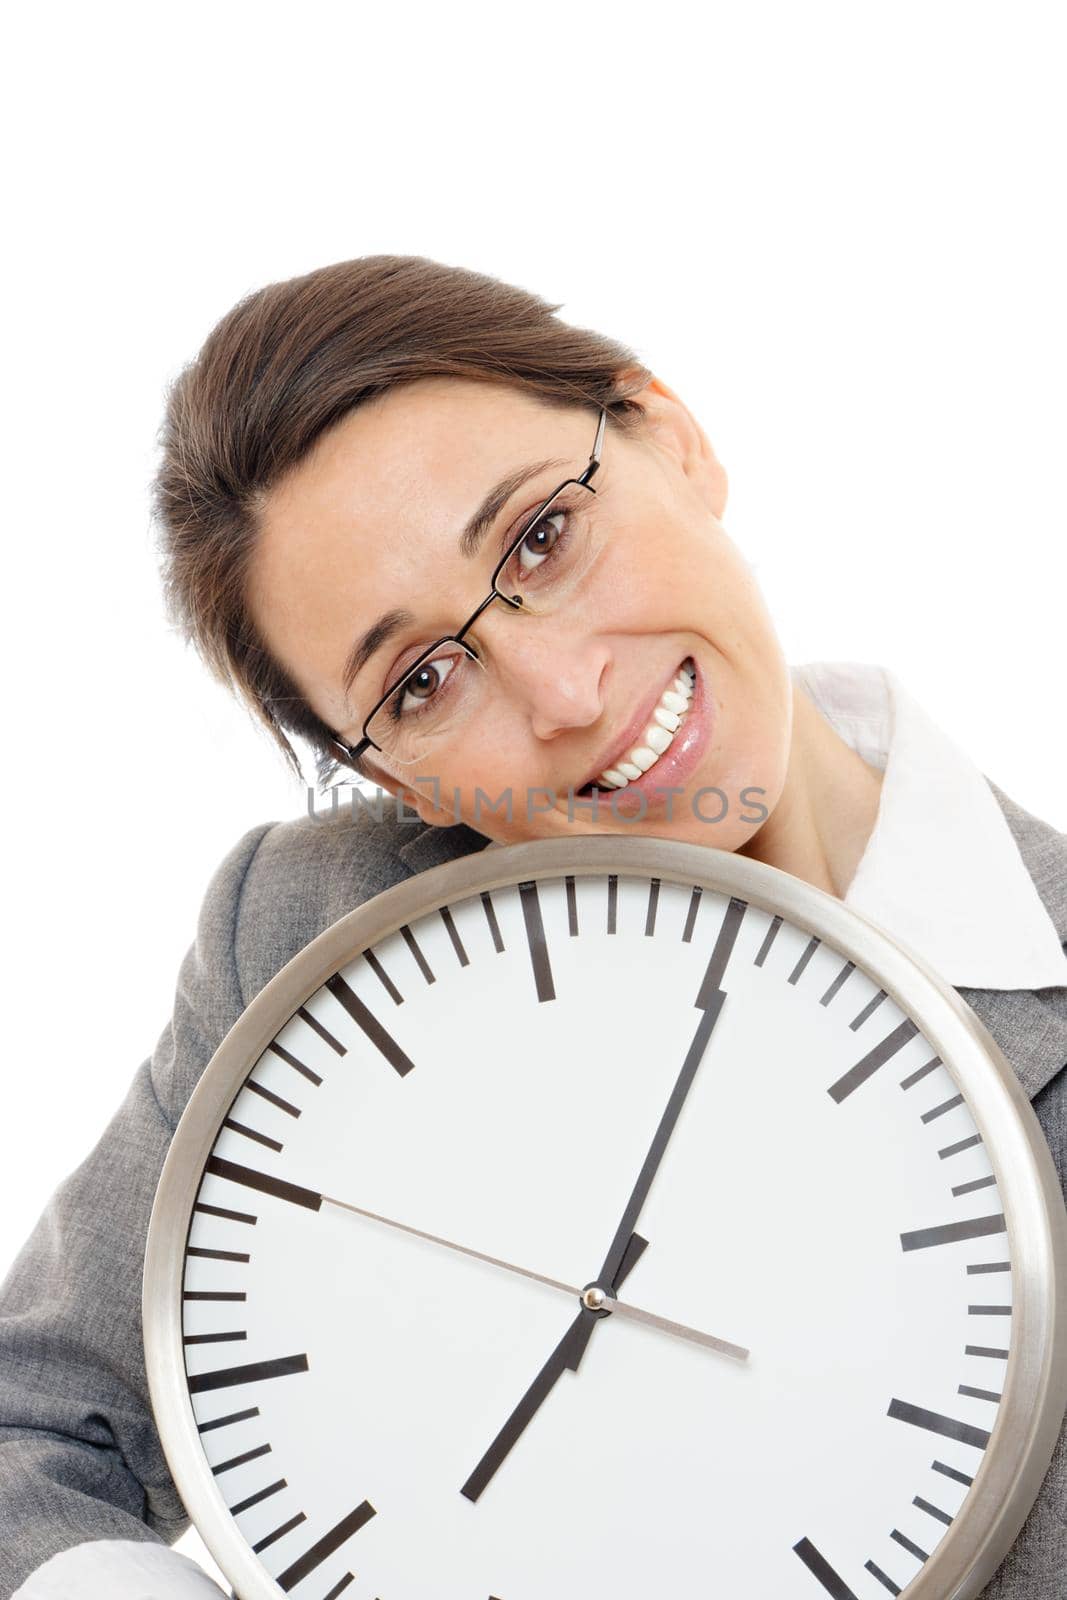 Young business woman smiling holding a clock on white background.